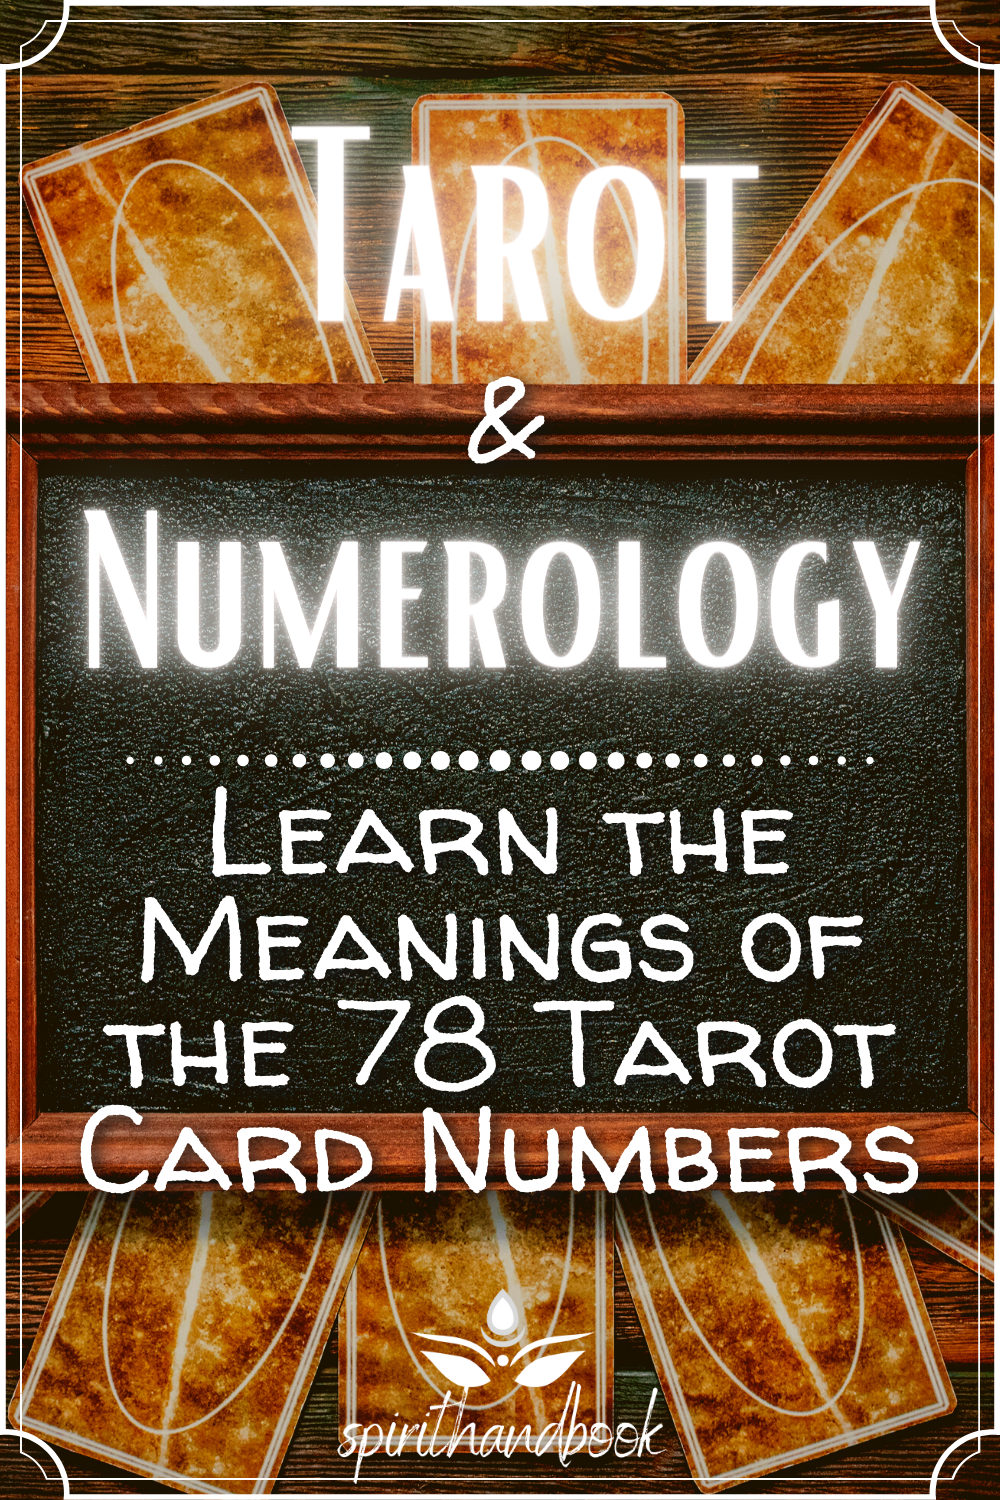 Tarot and Numerology Guide: Learn the Meanings of the 78 Tarot Card Numbers